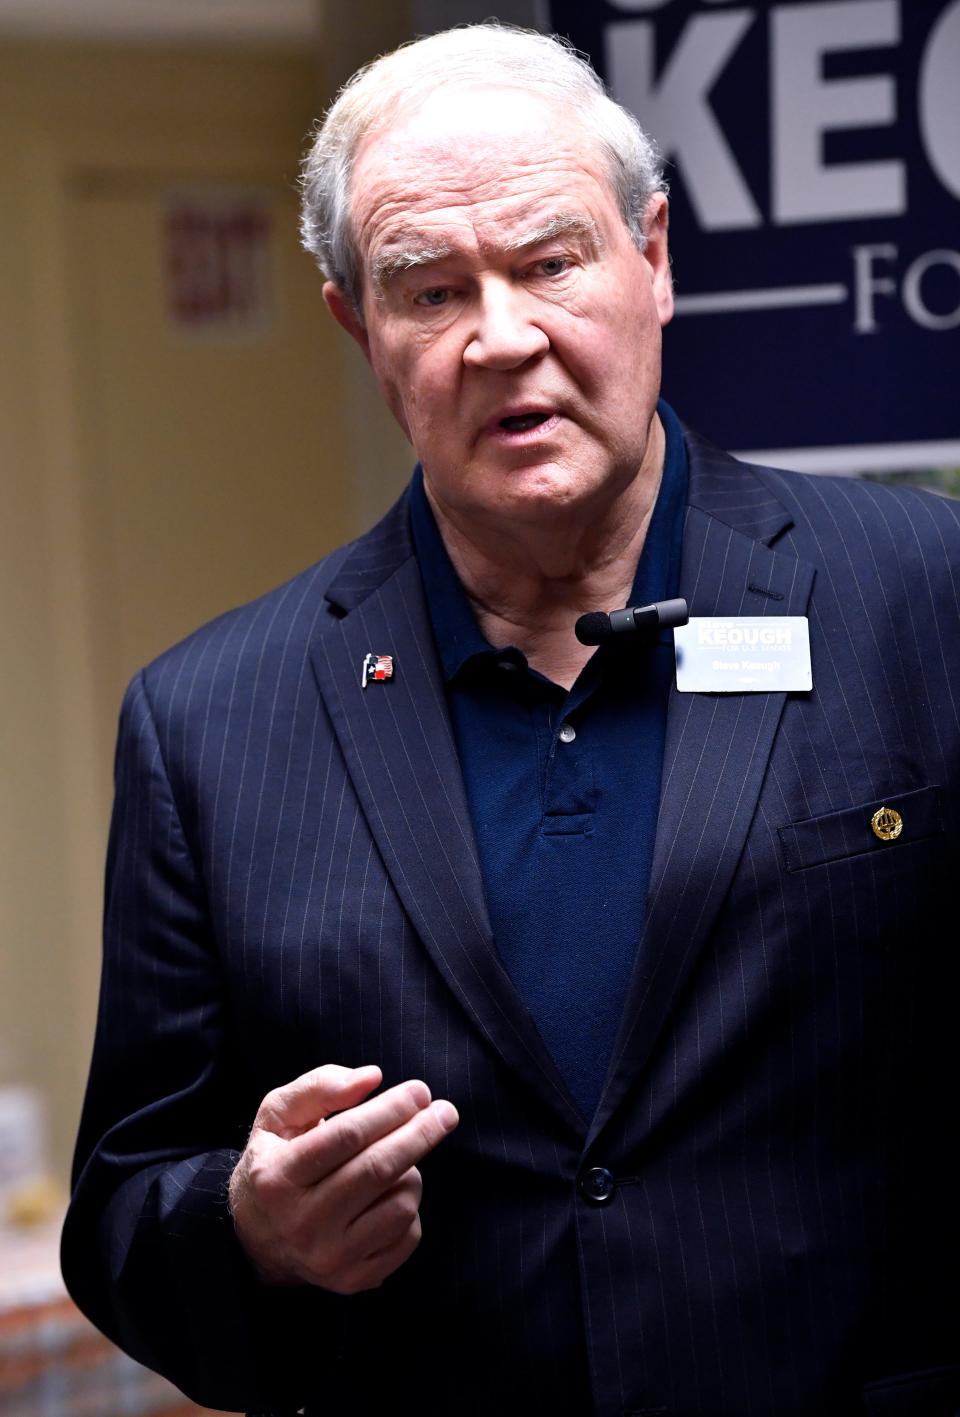 Steve Keough speaks during a press conference at the Taylor County Democratic Party’s headquarters Tuesday. Keough is hoping to secure the party’s nomination to run against U.S. Senator Ted Cruz in Nov. 2024.